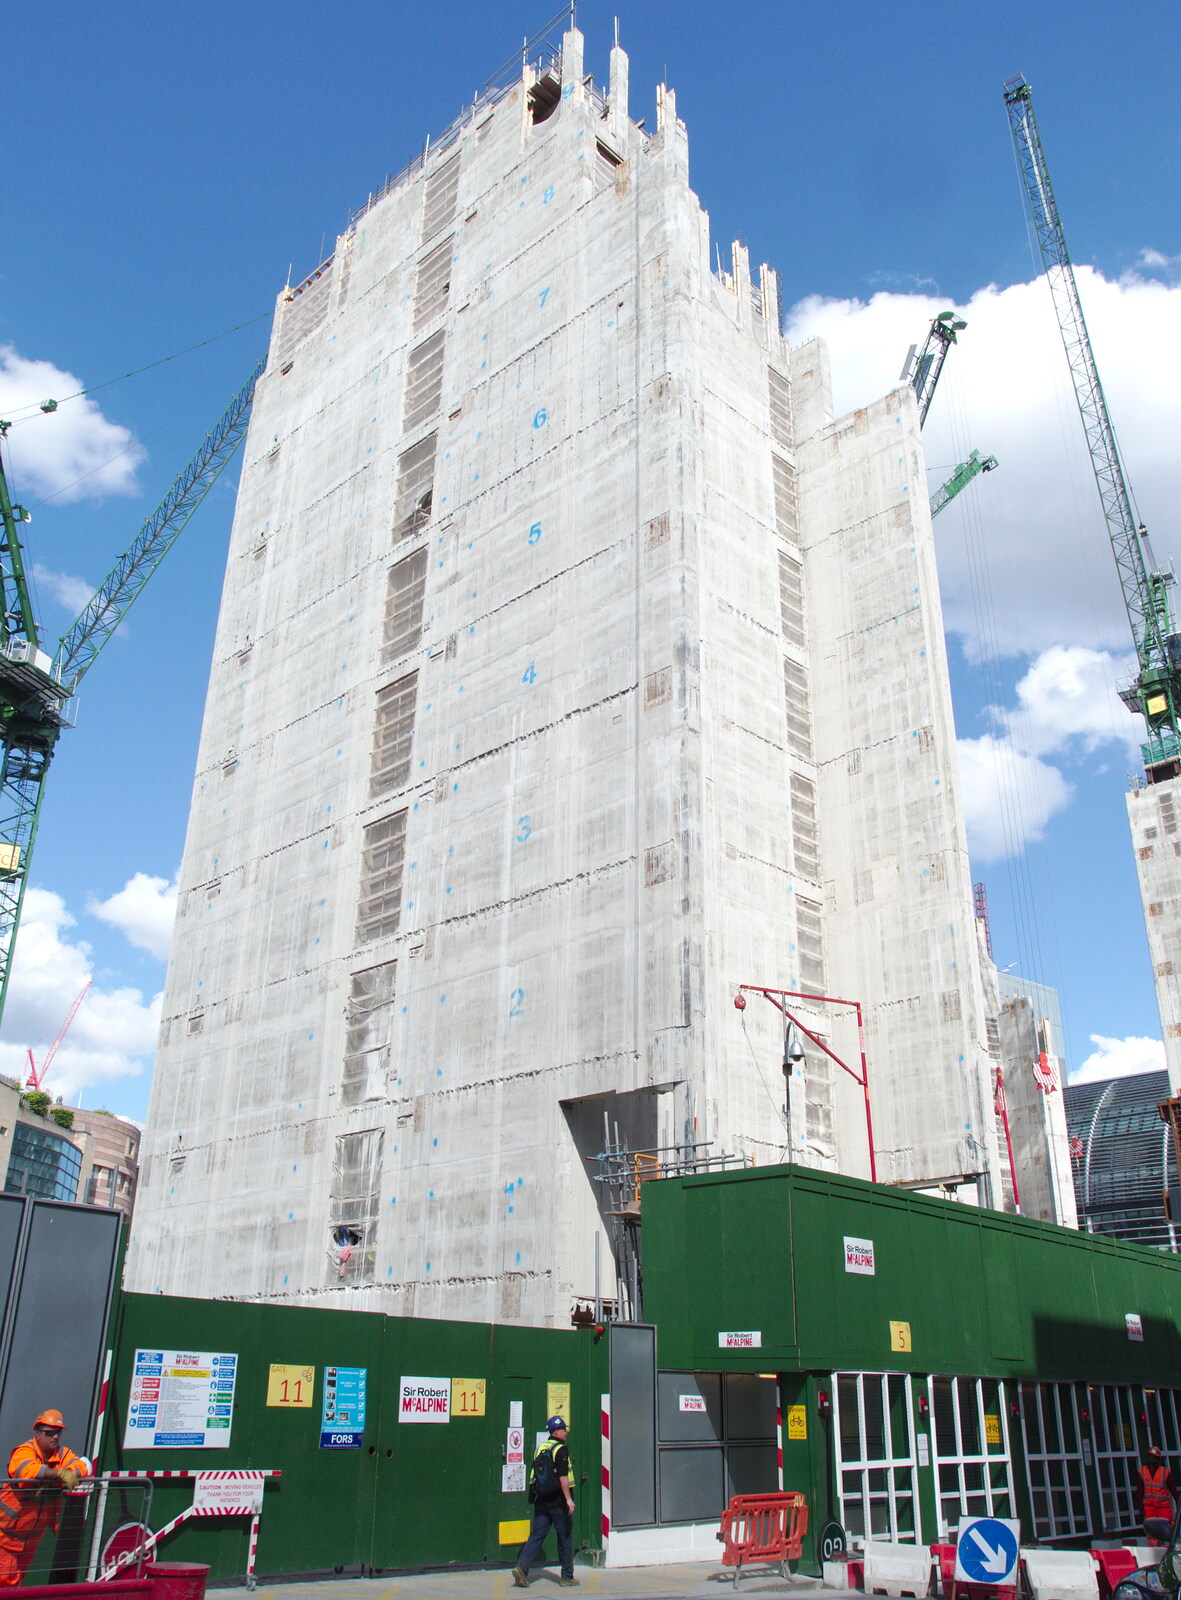 The central core of the new Bloomberg building from A May Miscellany, London - 8th May 2014